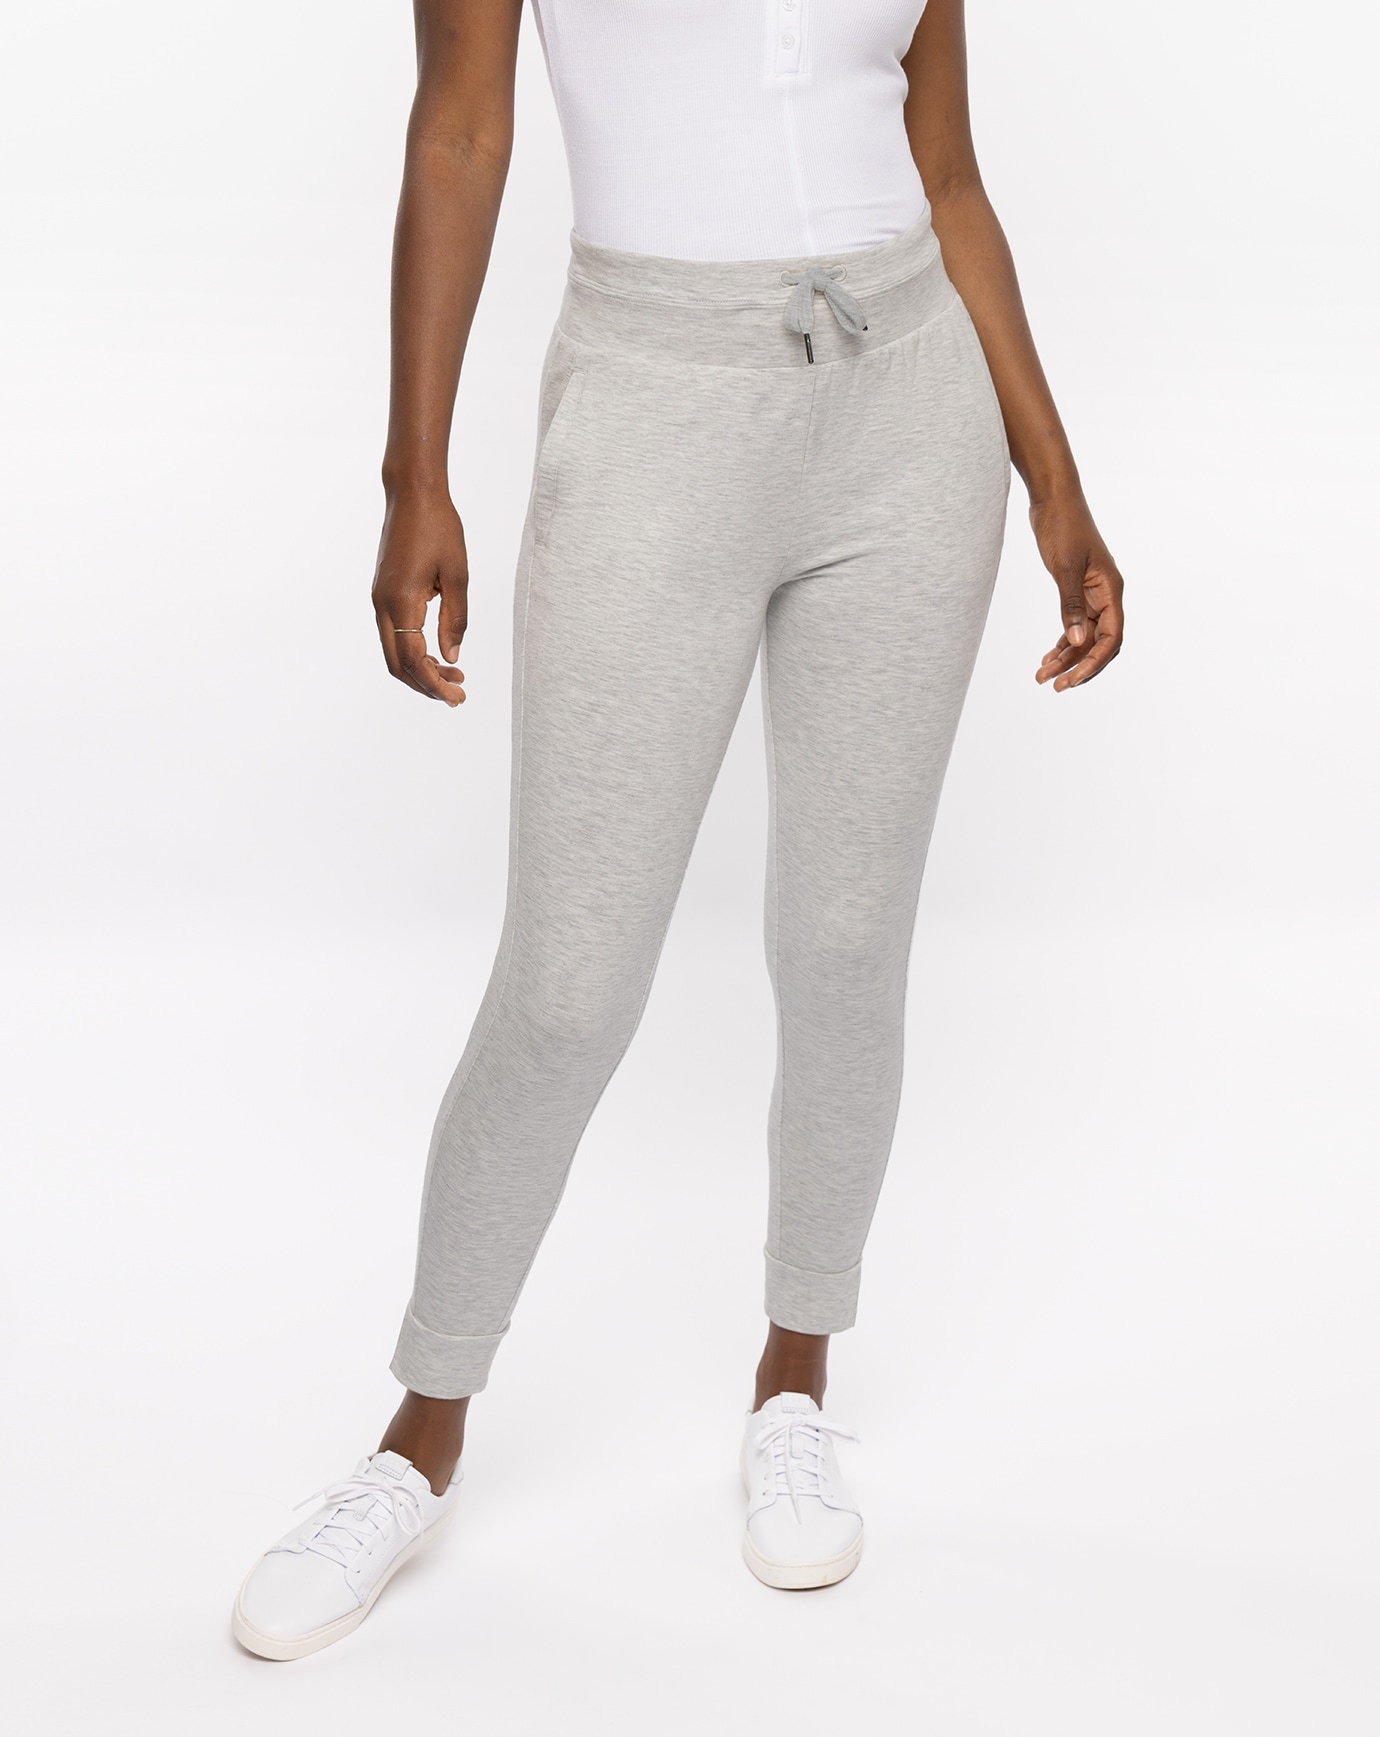 ADELAIDE CLOUD FRENCH TERRY JOGGER_1LC014_0HLG_